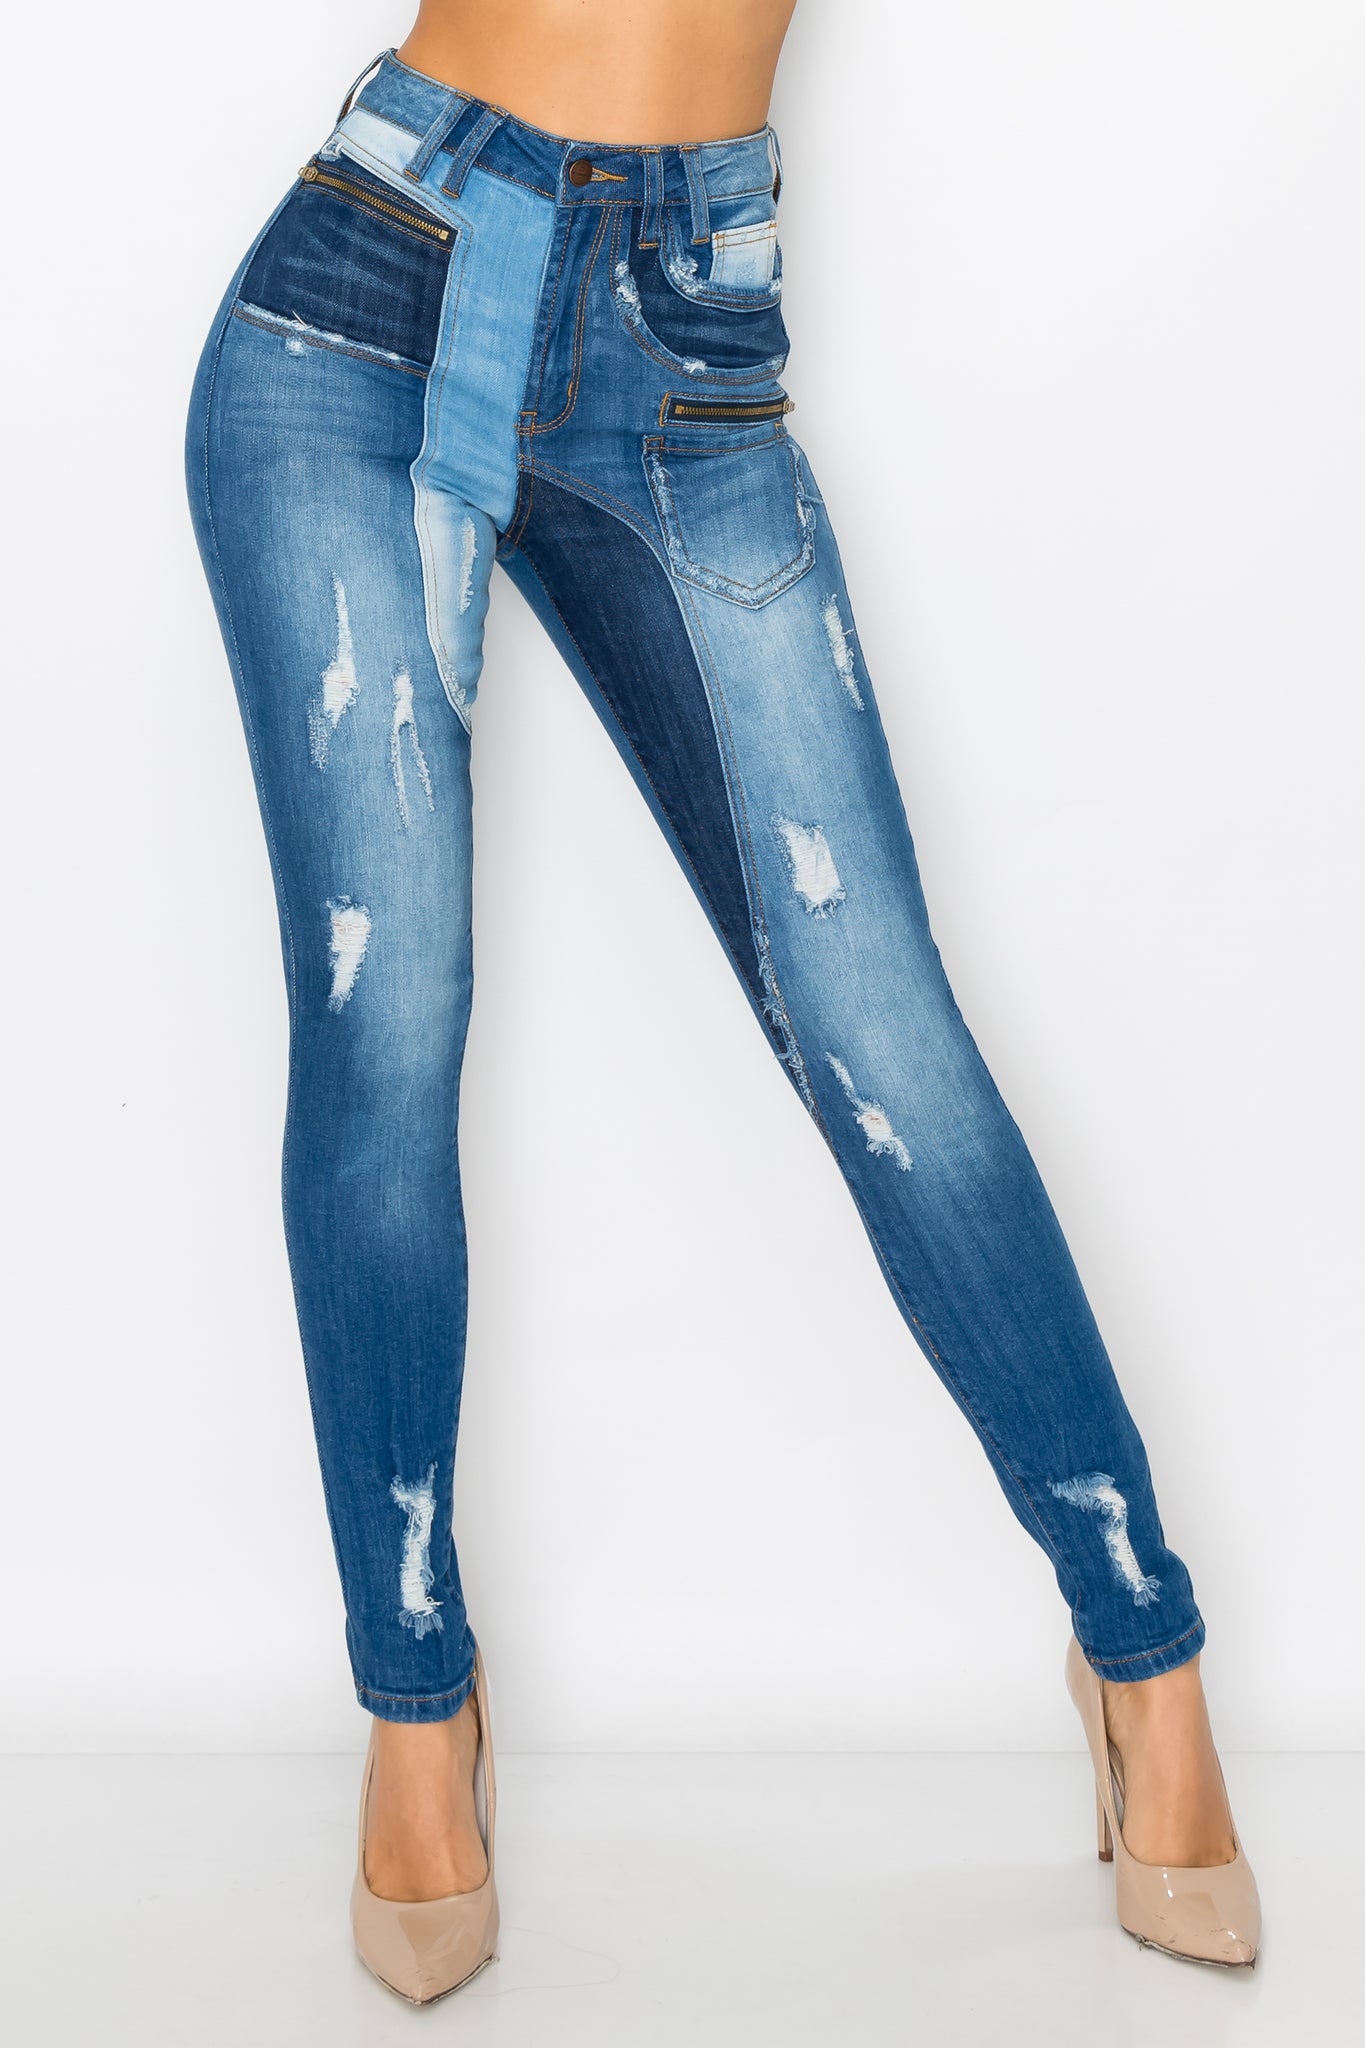 Jeans Cut Aphrodite Jeans – Flare with Waisted Outs Distressed High Super